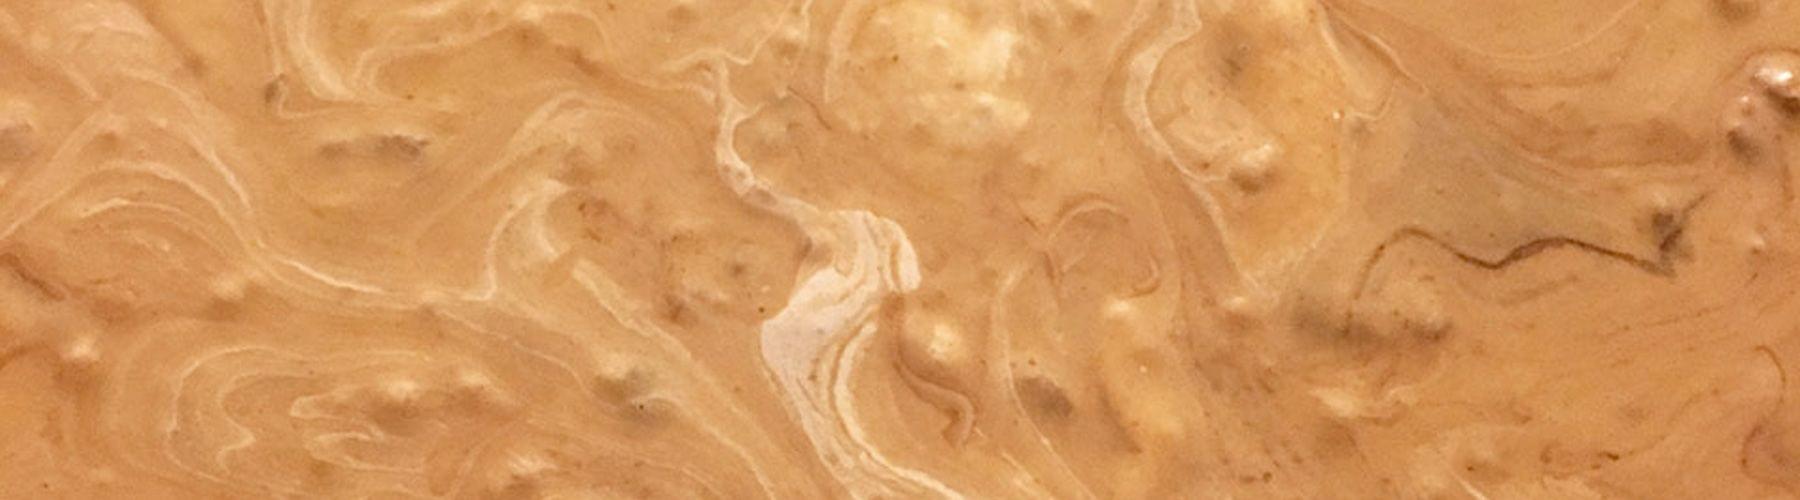 Close-up of chocolate and marshmallow swirls in a pan of uncut peanut butter fudge.